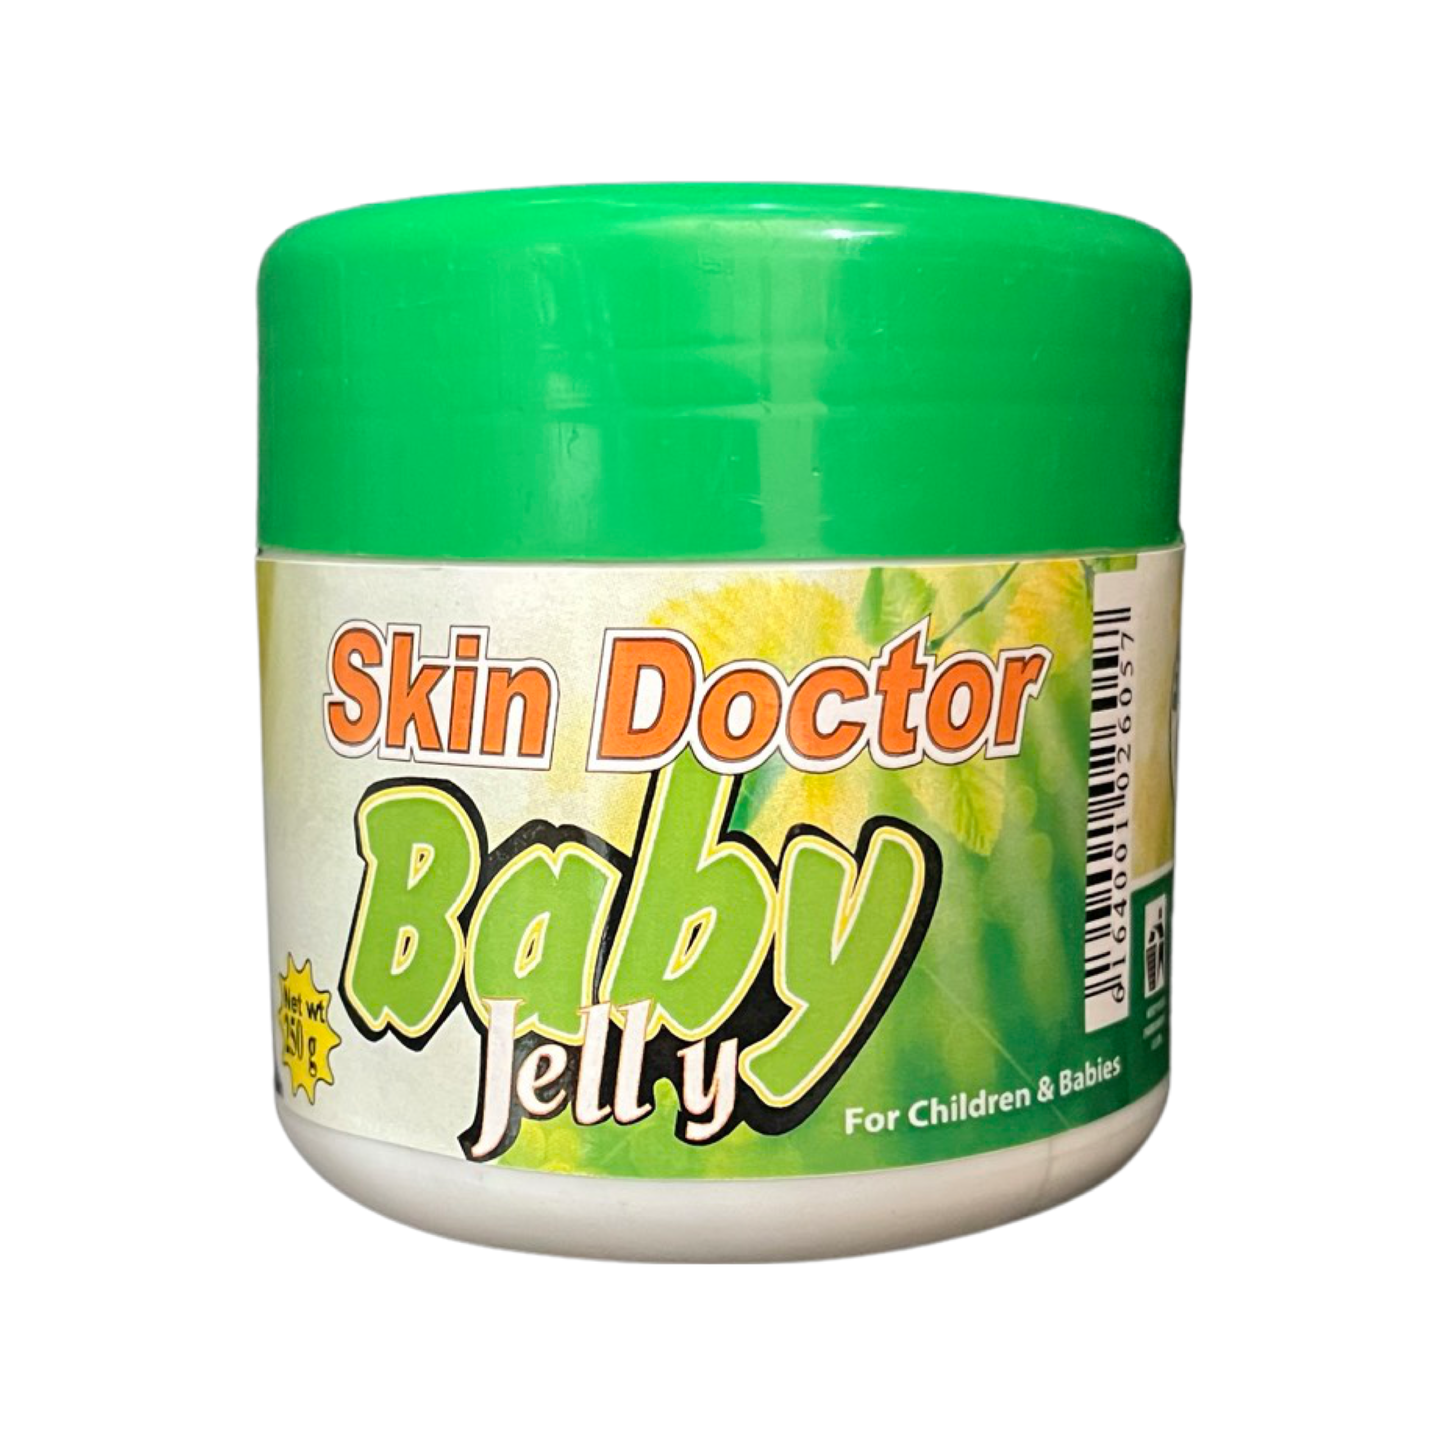 Skin Doctor Baby Jelly